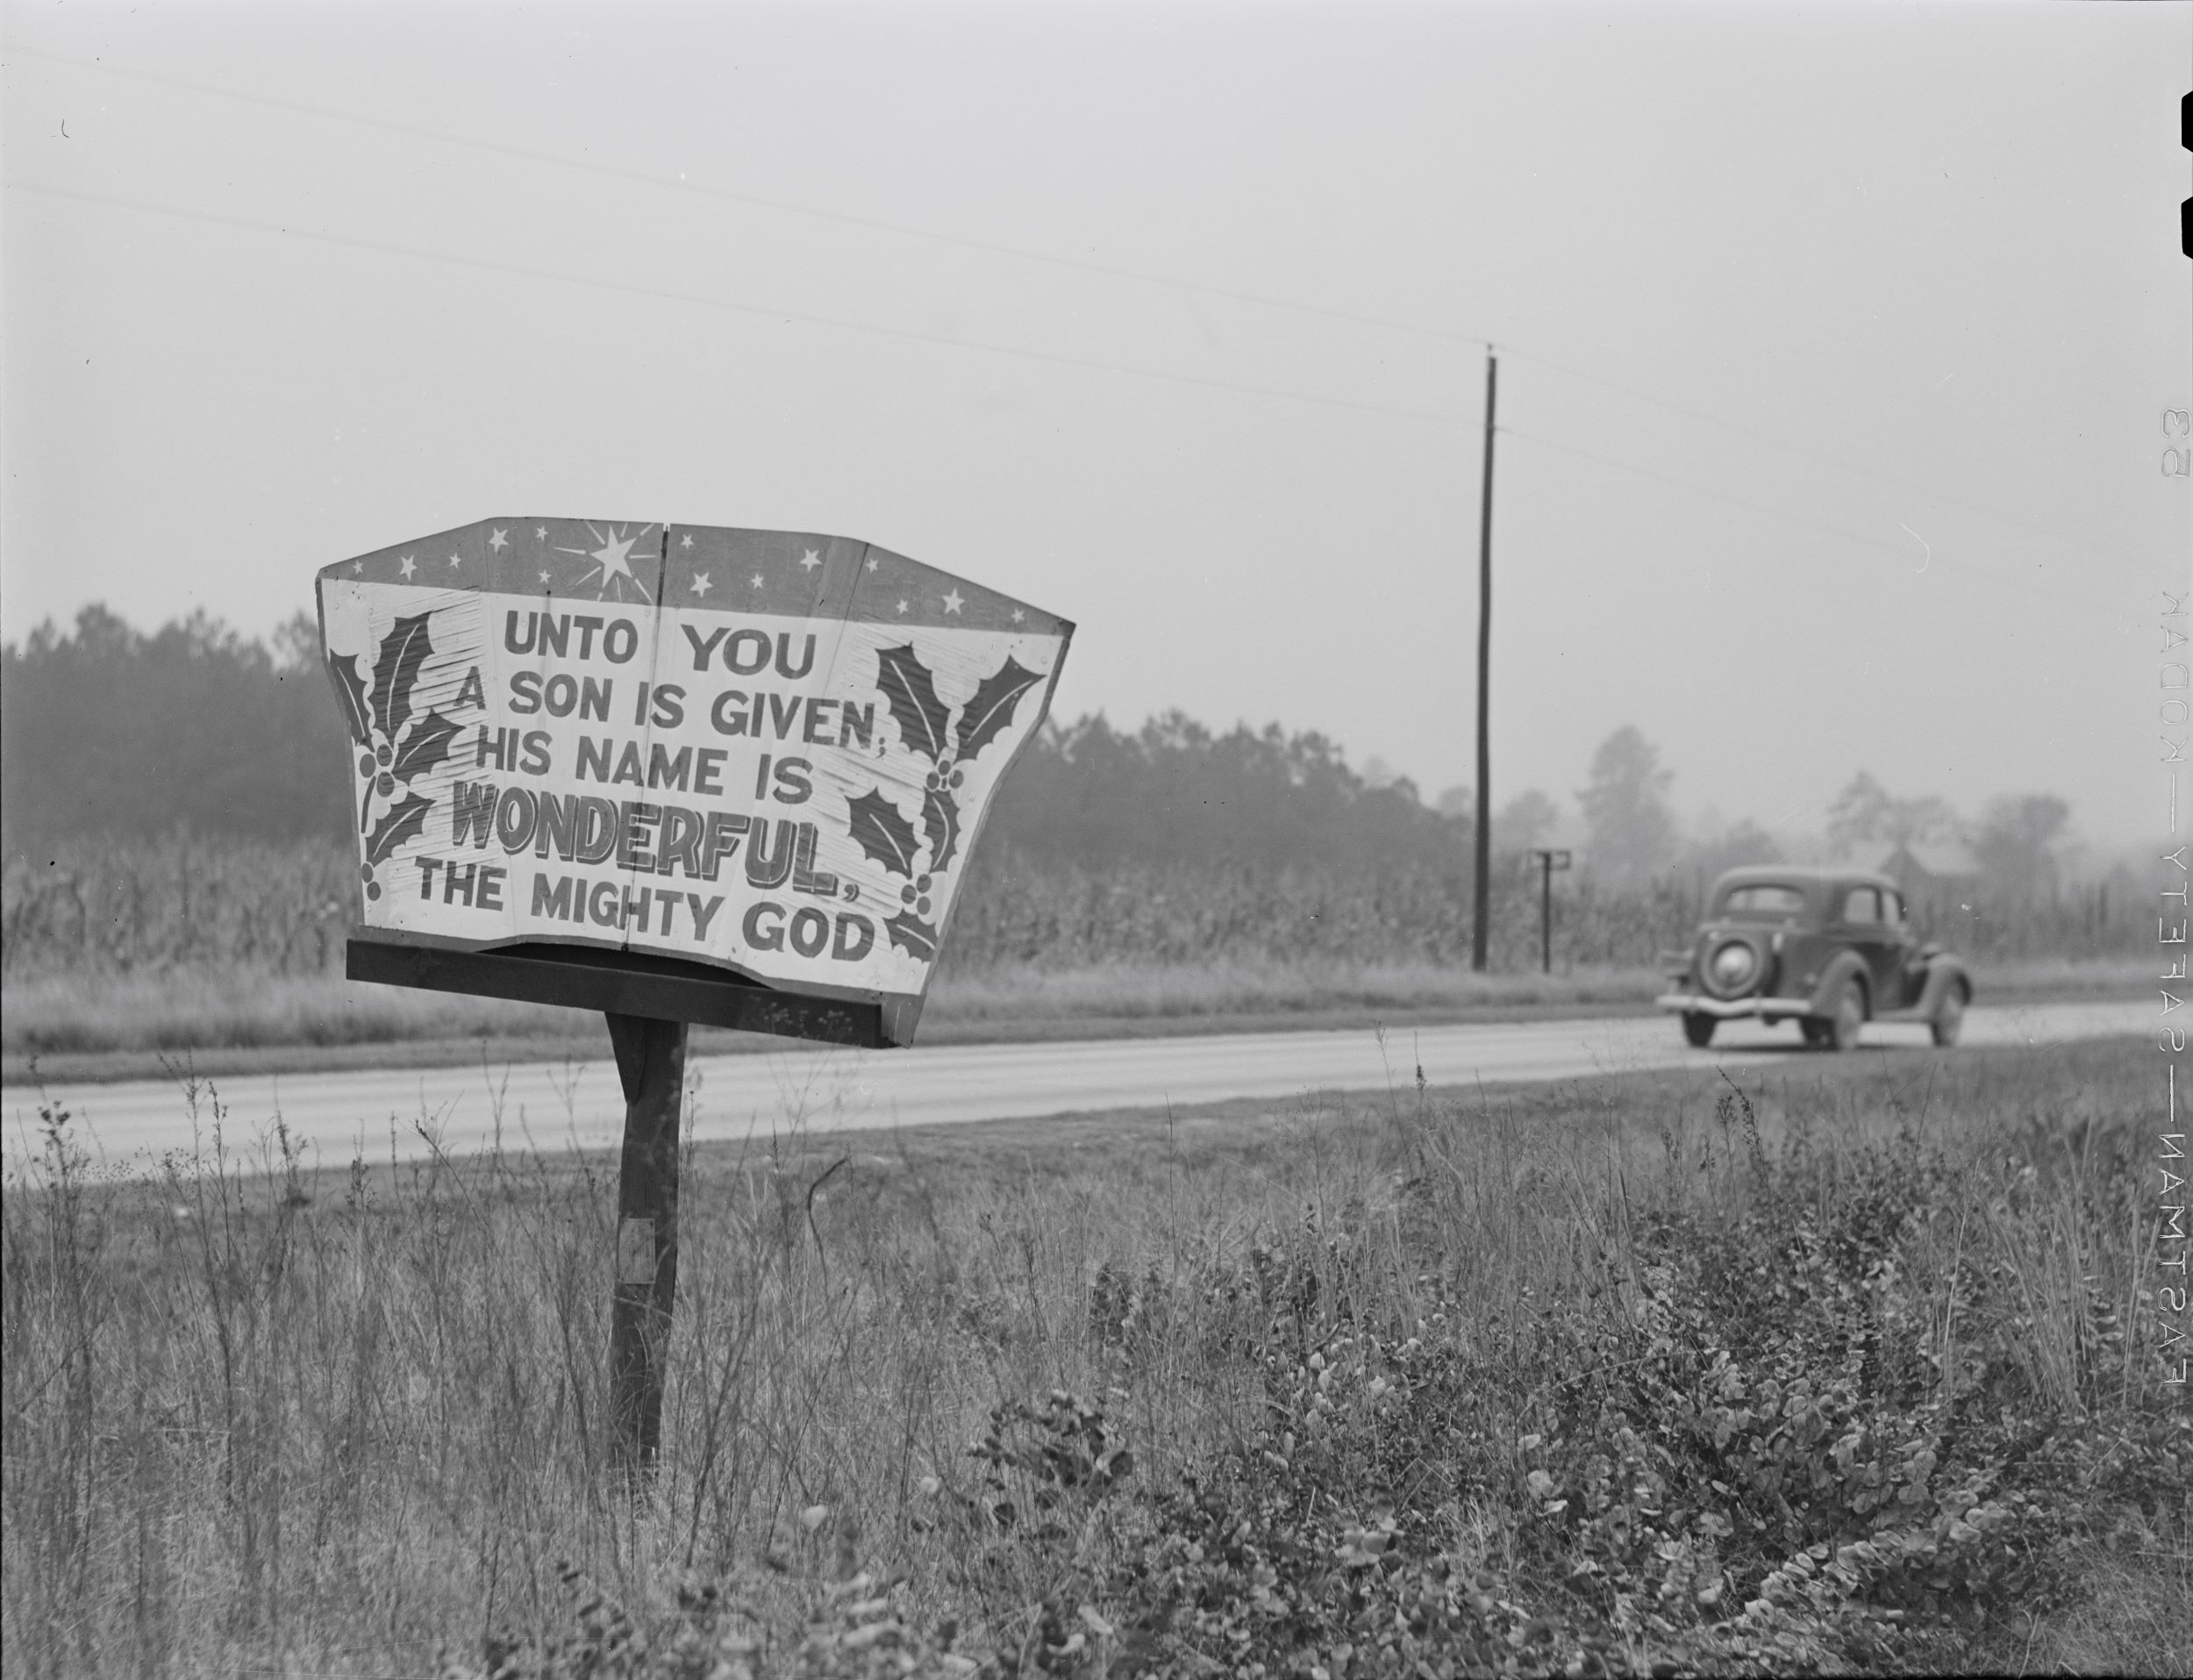 Black-and-white photograph of a rural road with a 1930s-era car driving off to the right. In the left foreground is a sign, decorated with stars and holly branches, reading "Unto you / a son is given / his name is / WONDERFUL / the might God"